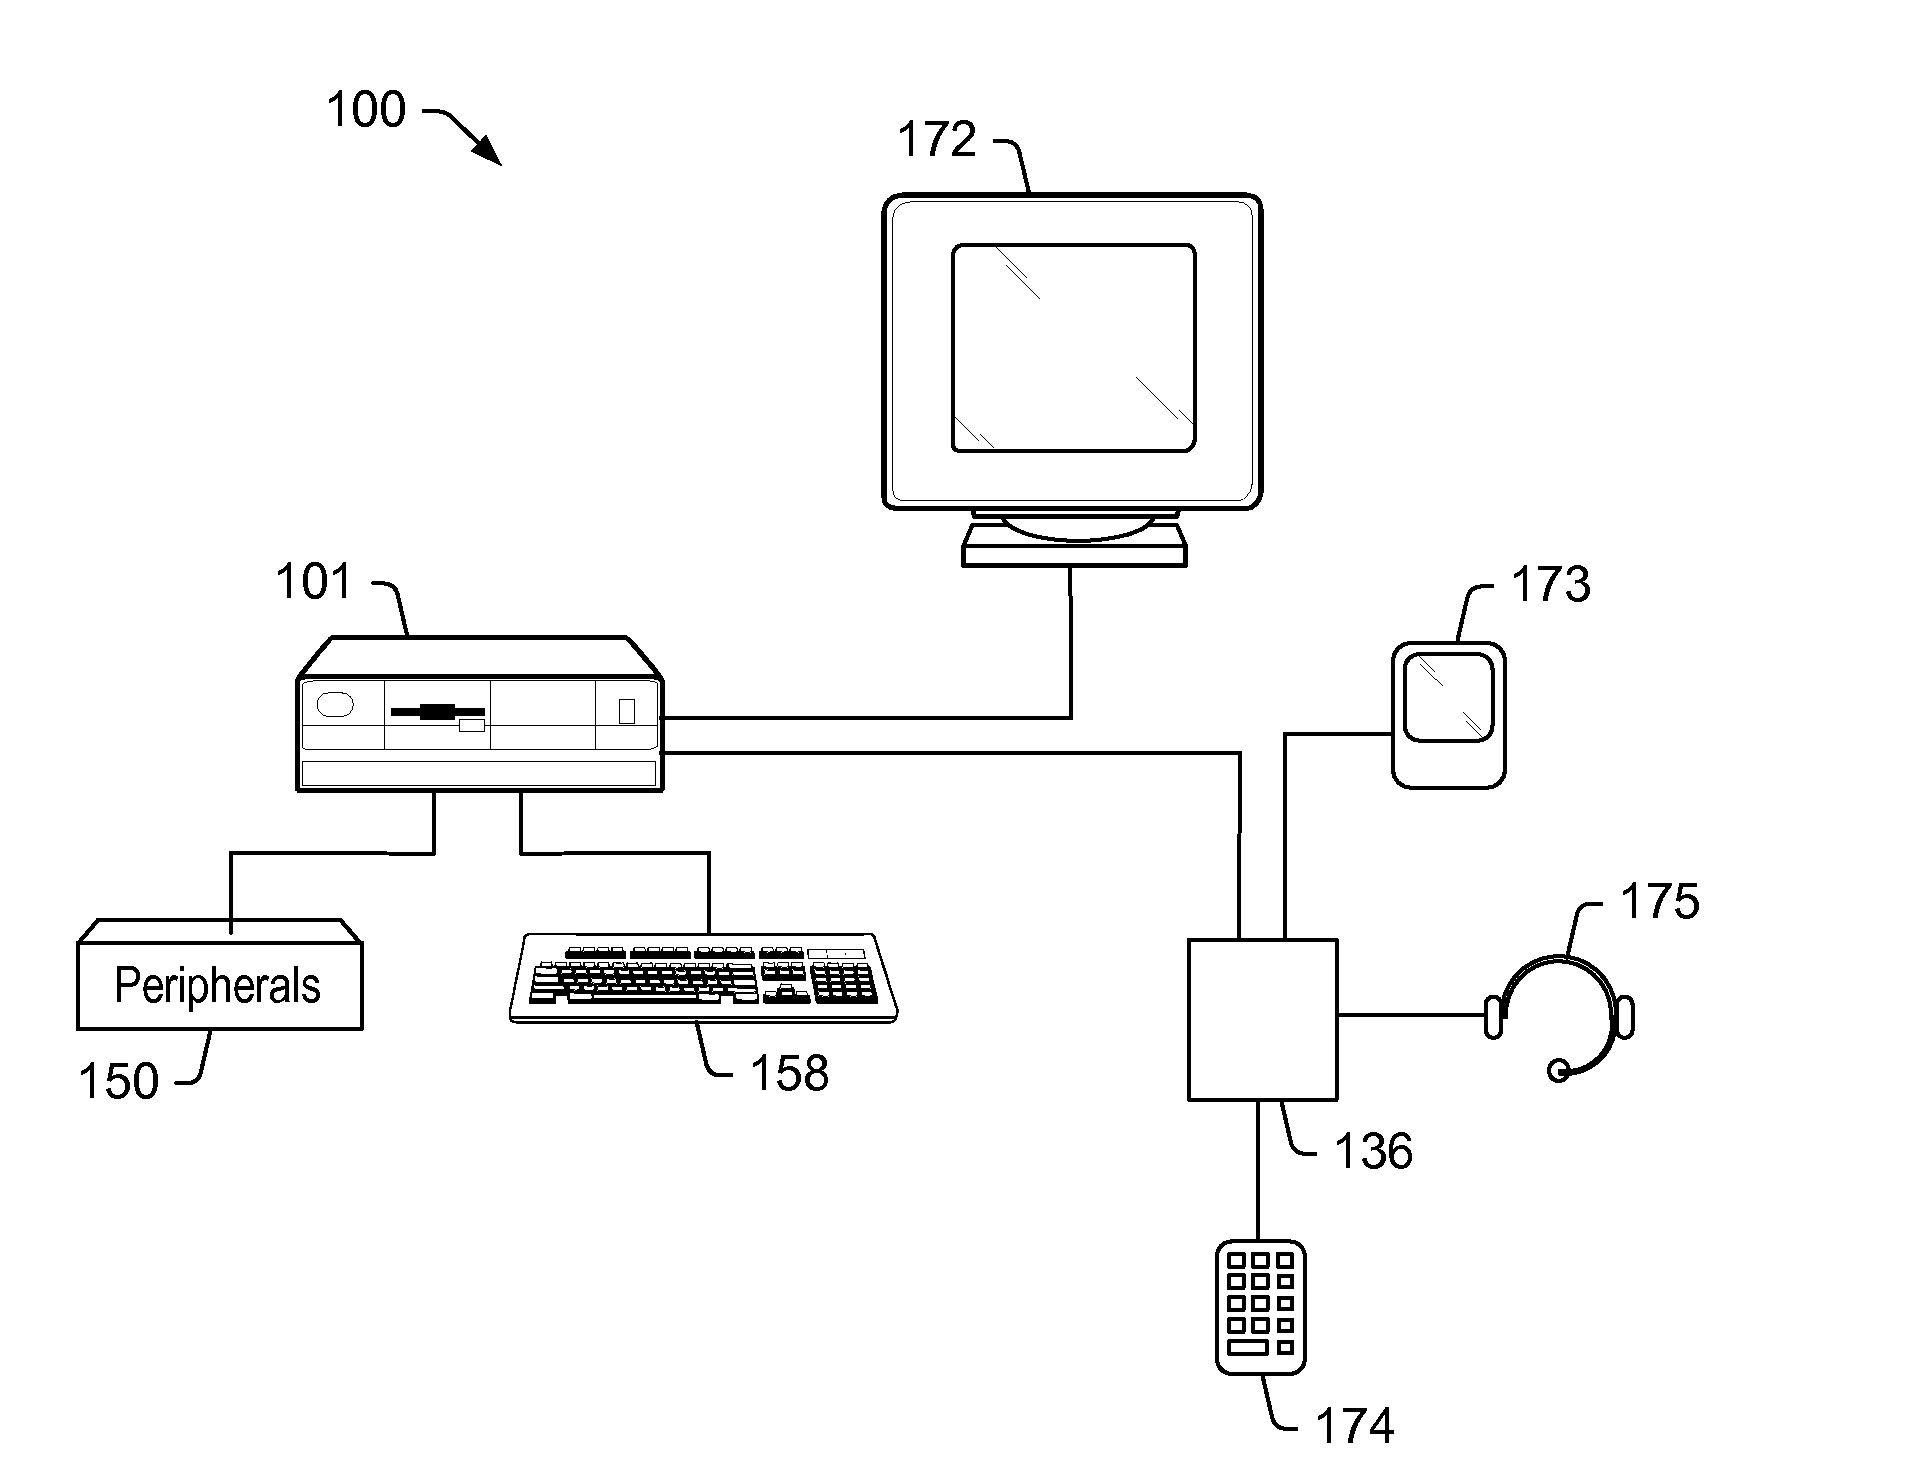 Computer system and processor having integrated phone functionality